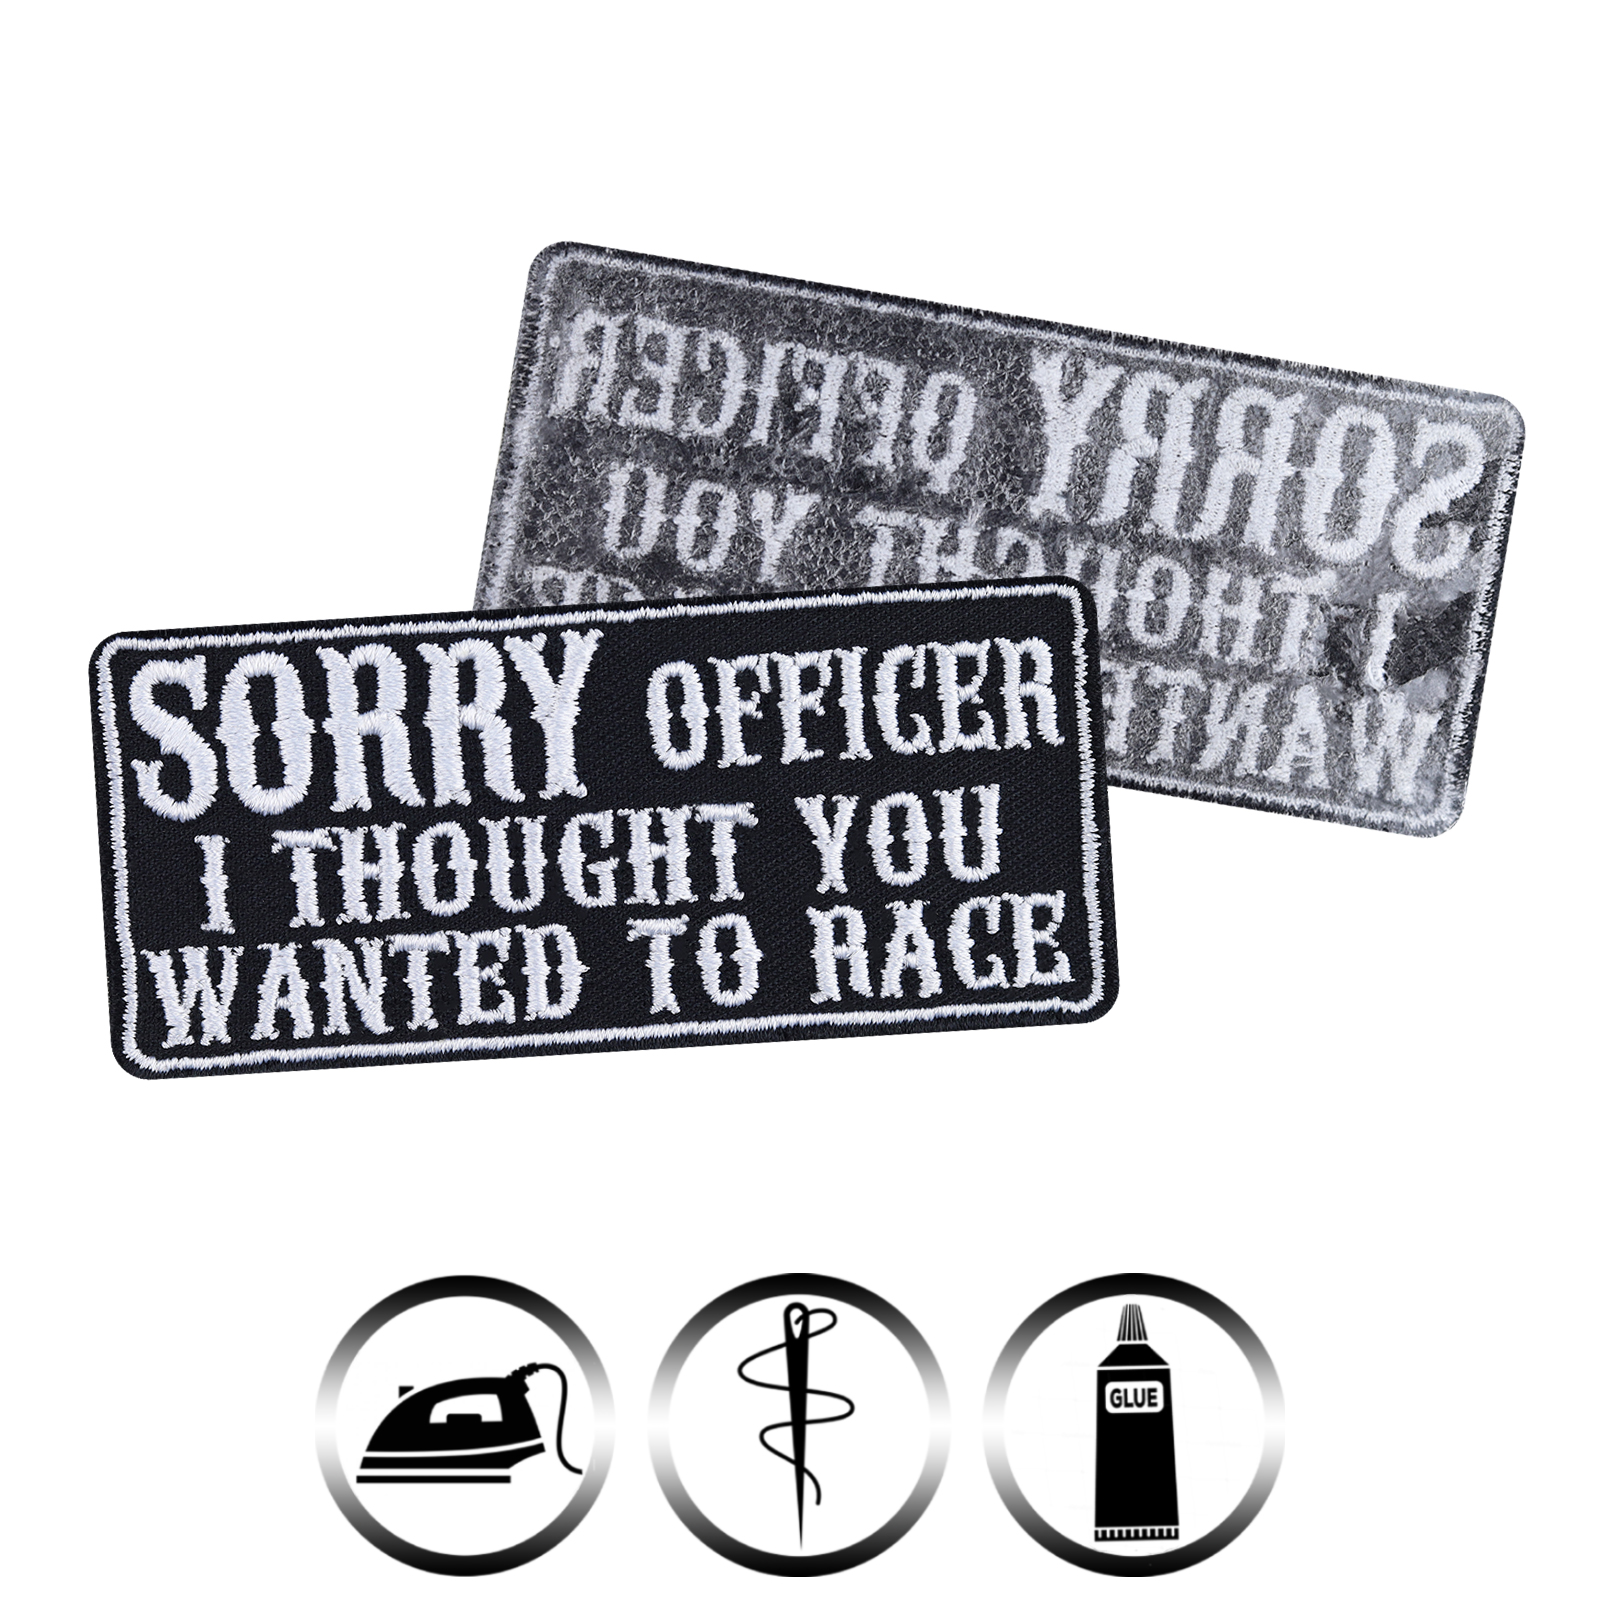 Sorry officer, I thought you wanted to race - Patch